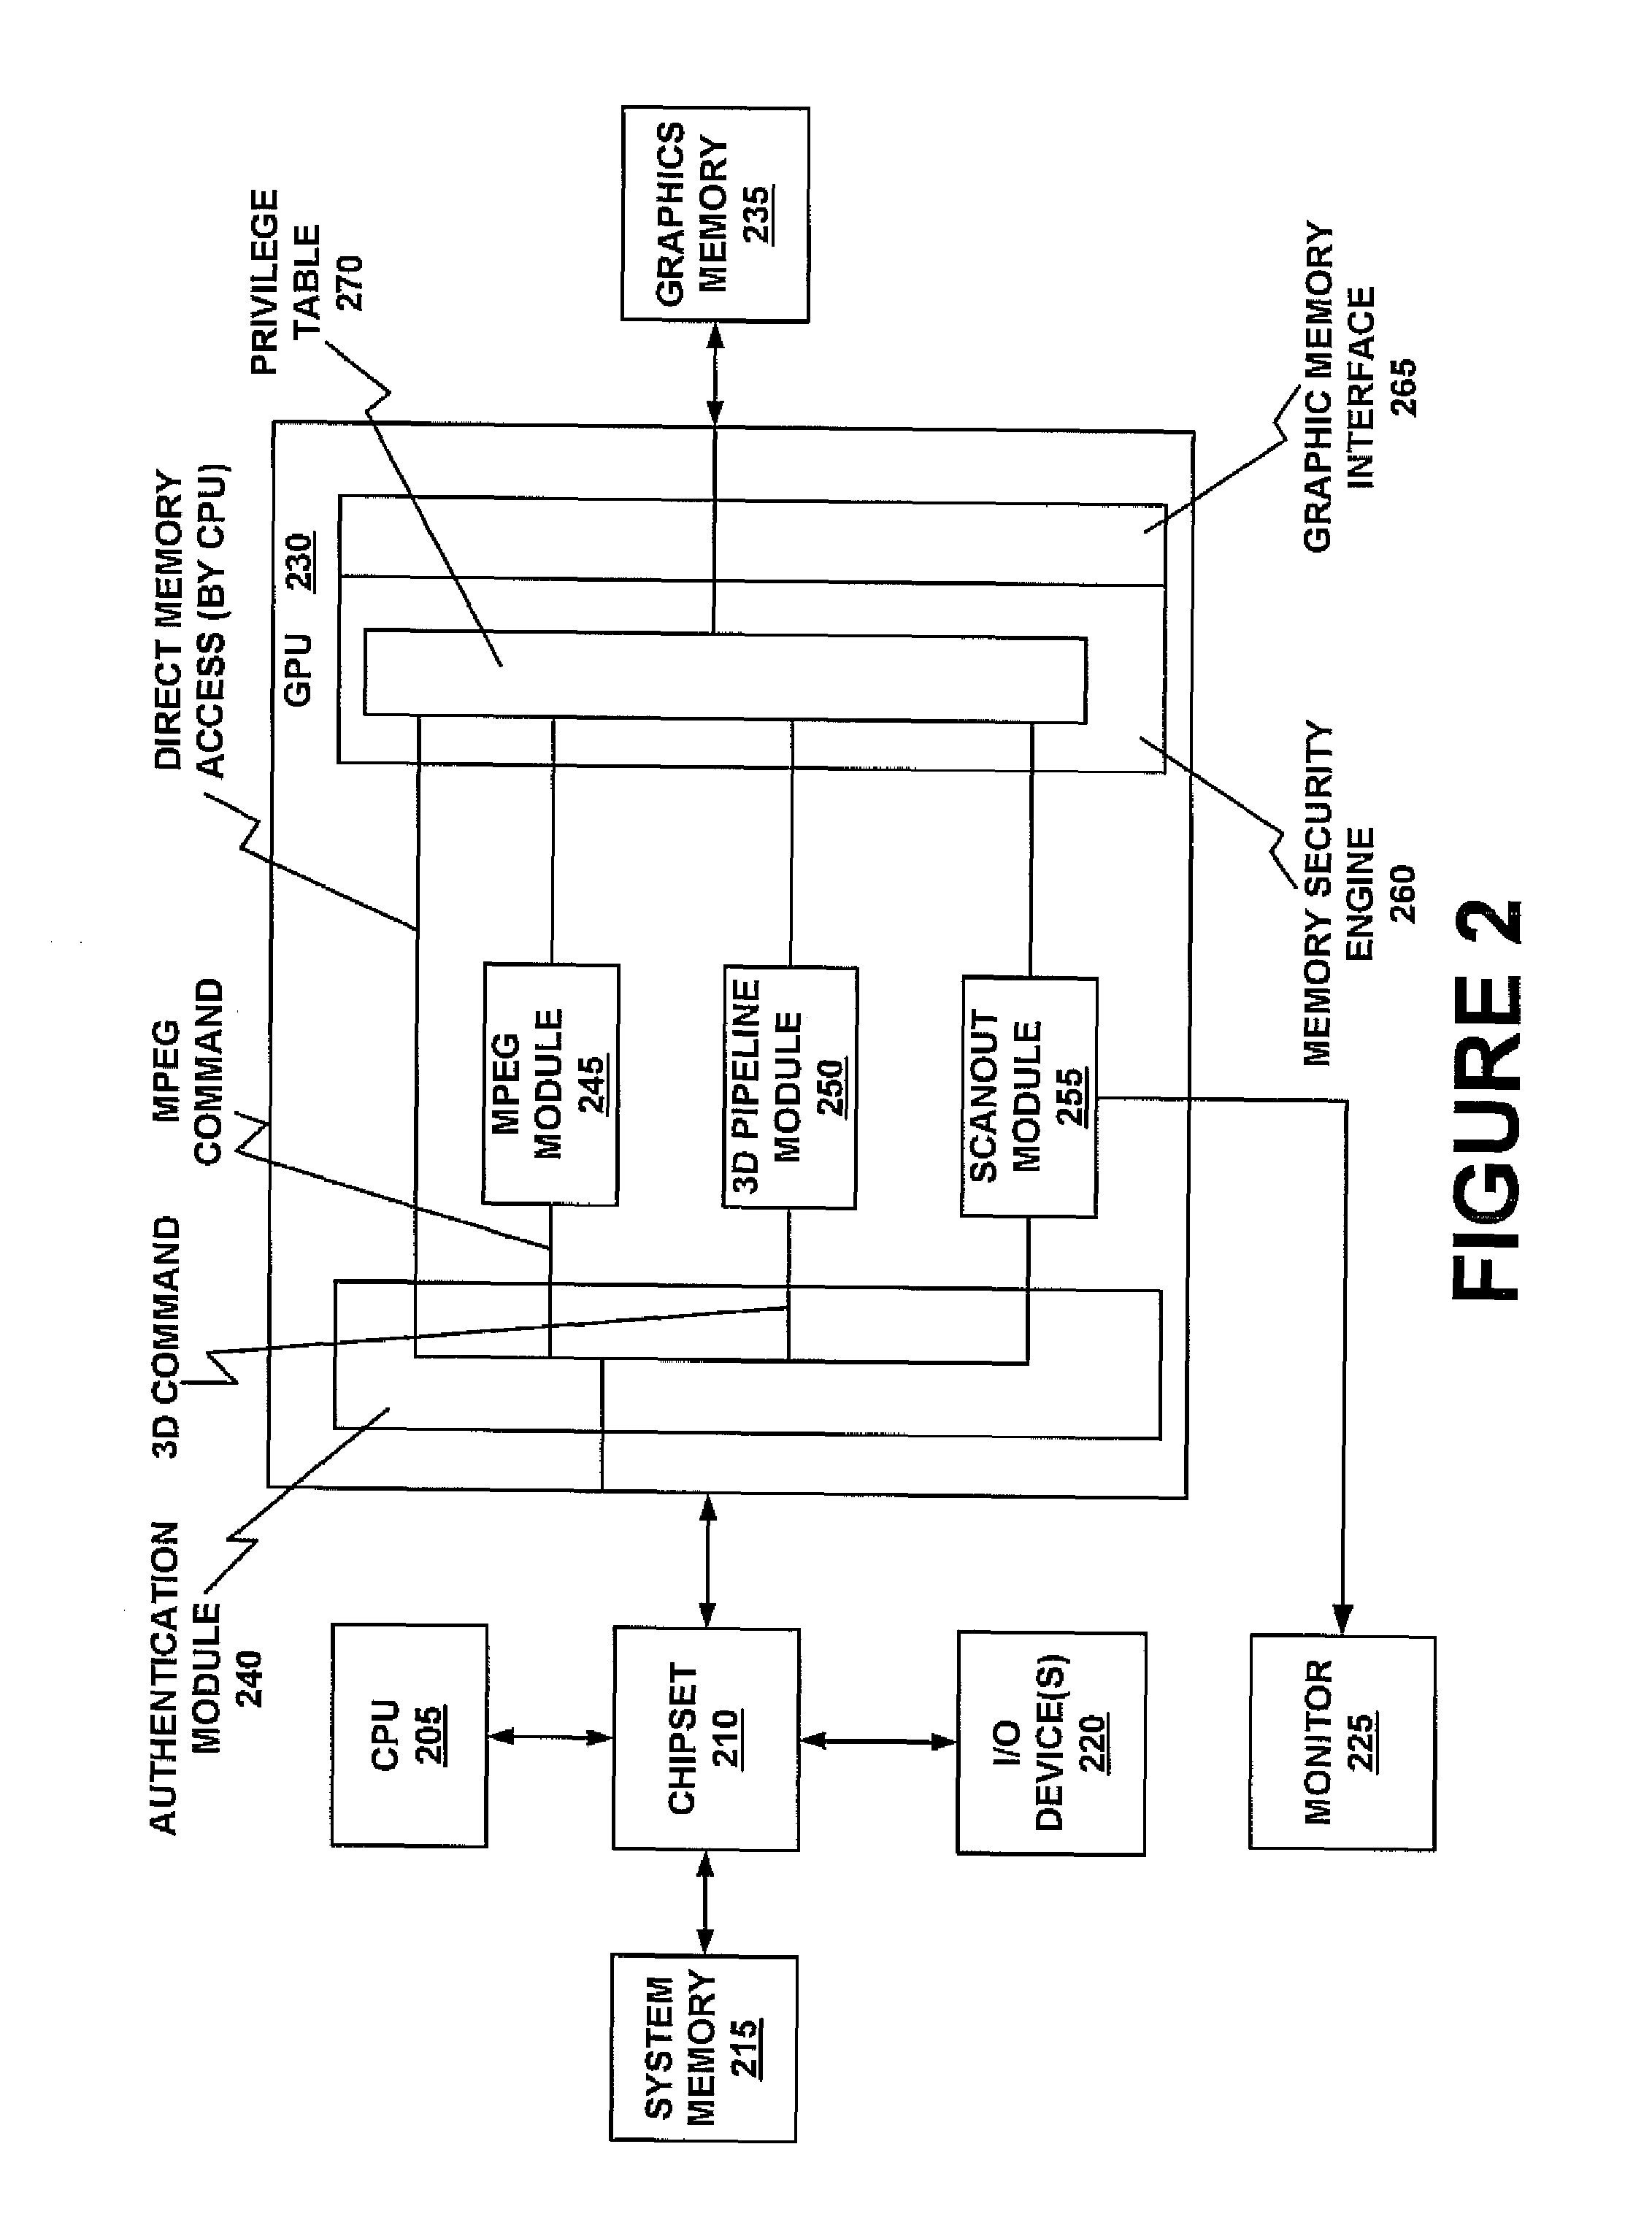 Memory redirect primitive for a secure graphics processing unit